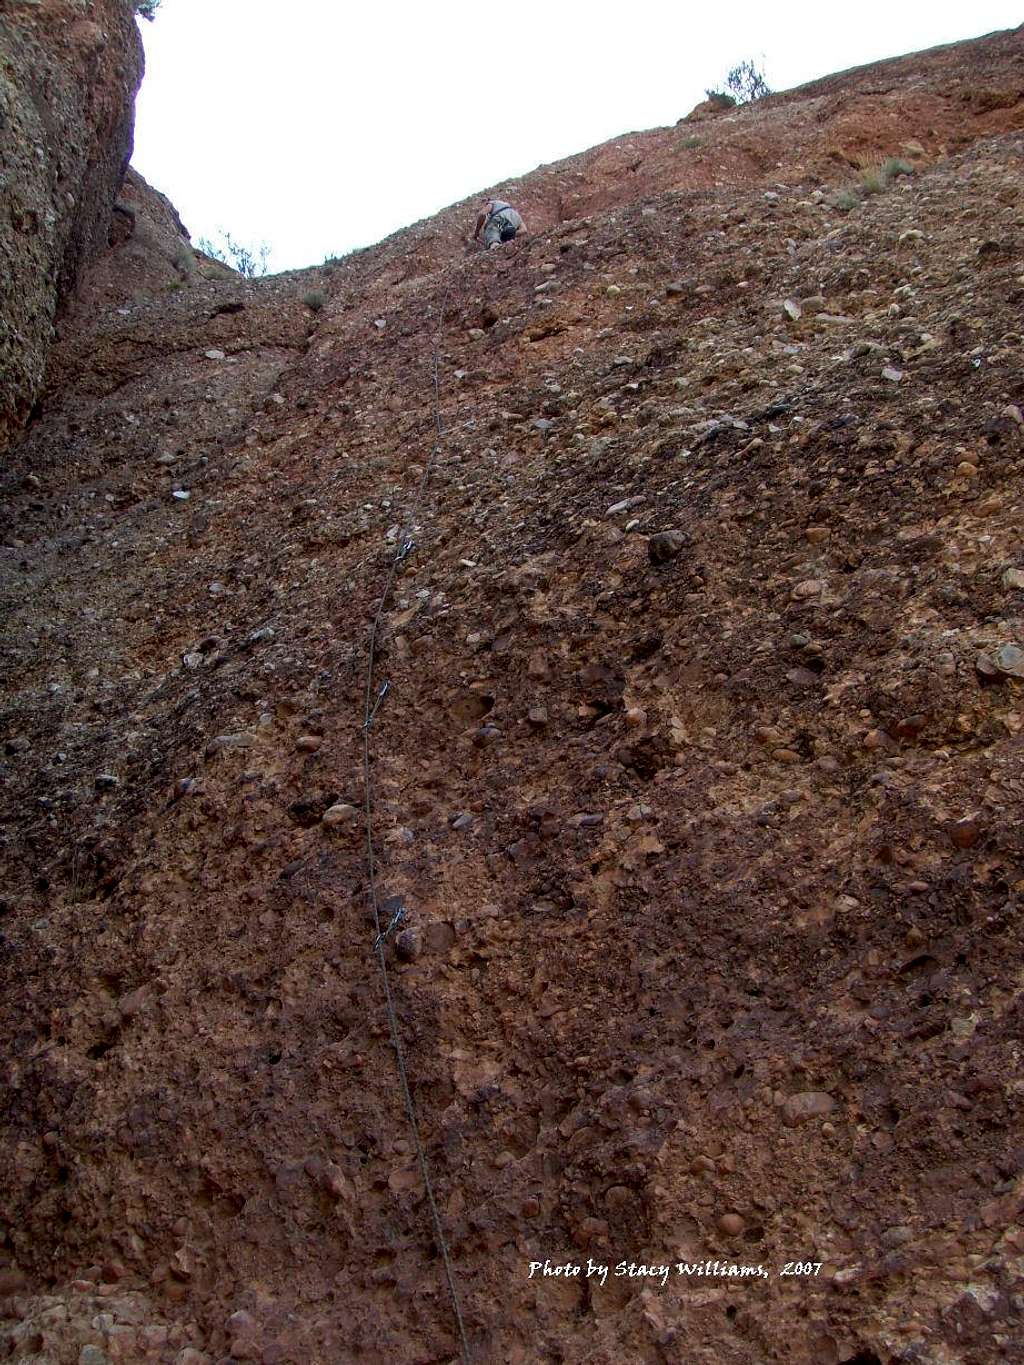 Unnamed Route, 5.10c